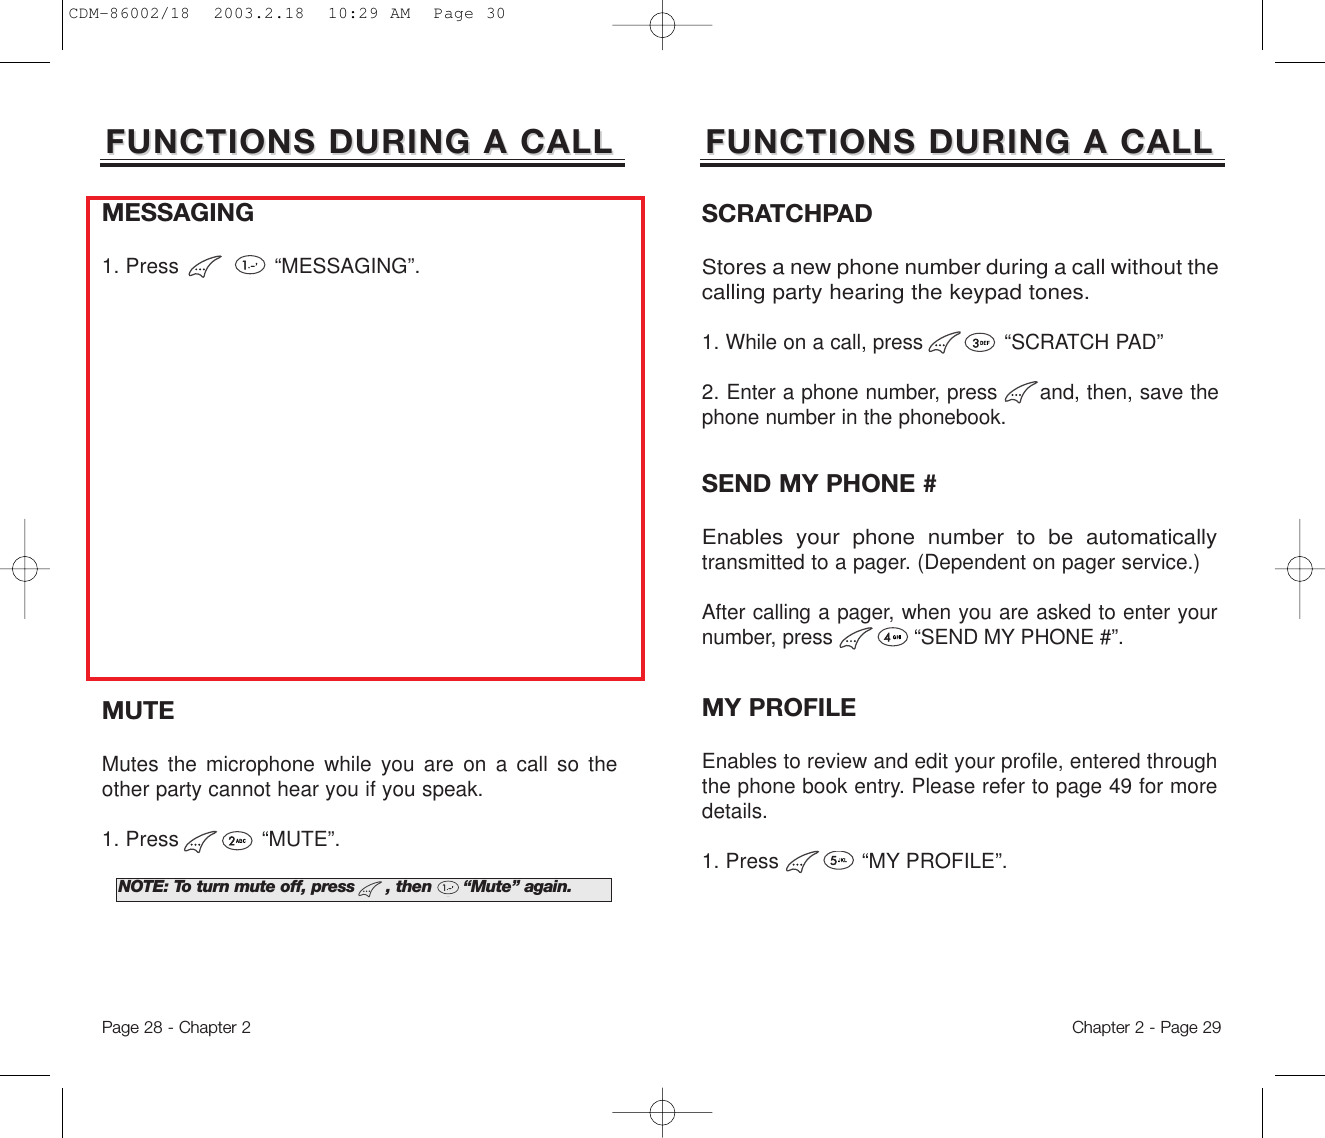 Chapter 2 - Page 29NOTE: To turn mute off, press      , then      “Mute” again.FUNCTIONS DURING A CALLFUNCTIONS DURING A CALLSEND MY PHONE #Enables your phone number to be automaticallytransmitted to a pager. (Dependent on pager service.)After calling a pager, when you are asked to enter yournumber, press             “SEND MY PHONE #”.MUTEMutes the microphone while you are on a call so theother party cannot hear you if you speak.1. Press             “MUTE”.MESSAGING1. Press               “MESSAGING”.Page 28 - Chapter 2SCRATCHPADStores a new phone number during a call without thecalling party hearing the keypad tones.1. While on a call, press             “SCRATCH PAD”2. Enter a phone number, press      and, then, save thephone number in the phonebook.FUNCTIONS DURING A CALLFUNCTIONS DURING A CALLMY PROFILEEnables to review and edit your profile, entered throughthe phone book entry. Please refer to page 49 for moredetails.1. Press             “MY PROFILE”.CDM-86002/18  2003.2.18  10:29 AM  Page 30